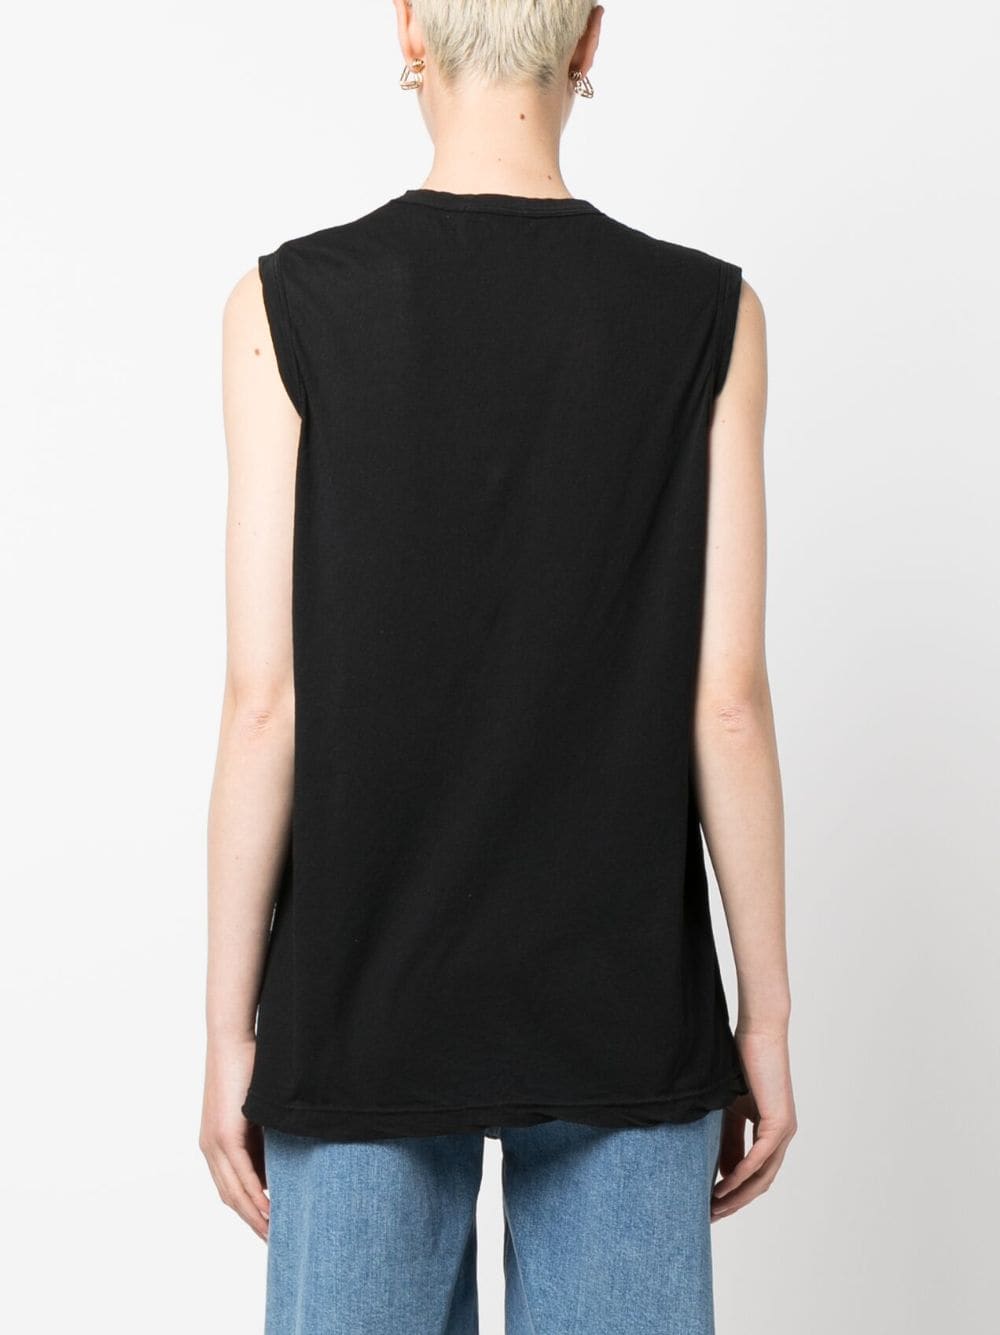 JAMES PERSE RELAXED FIT JERSEY MUSCLE TANK